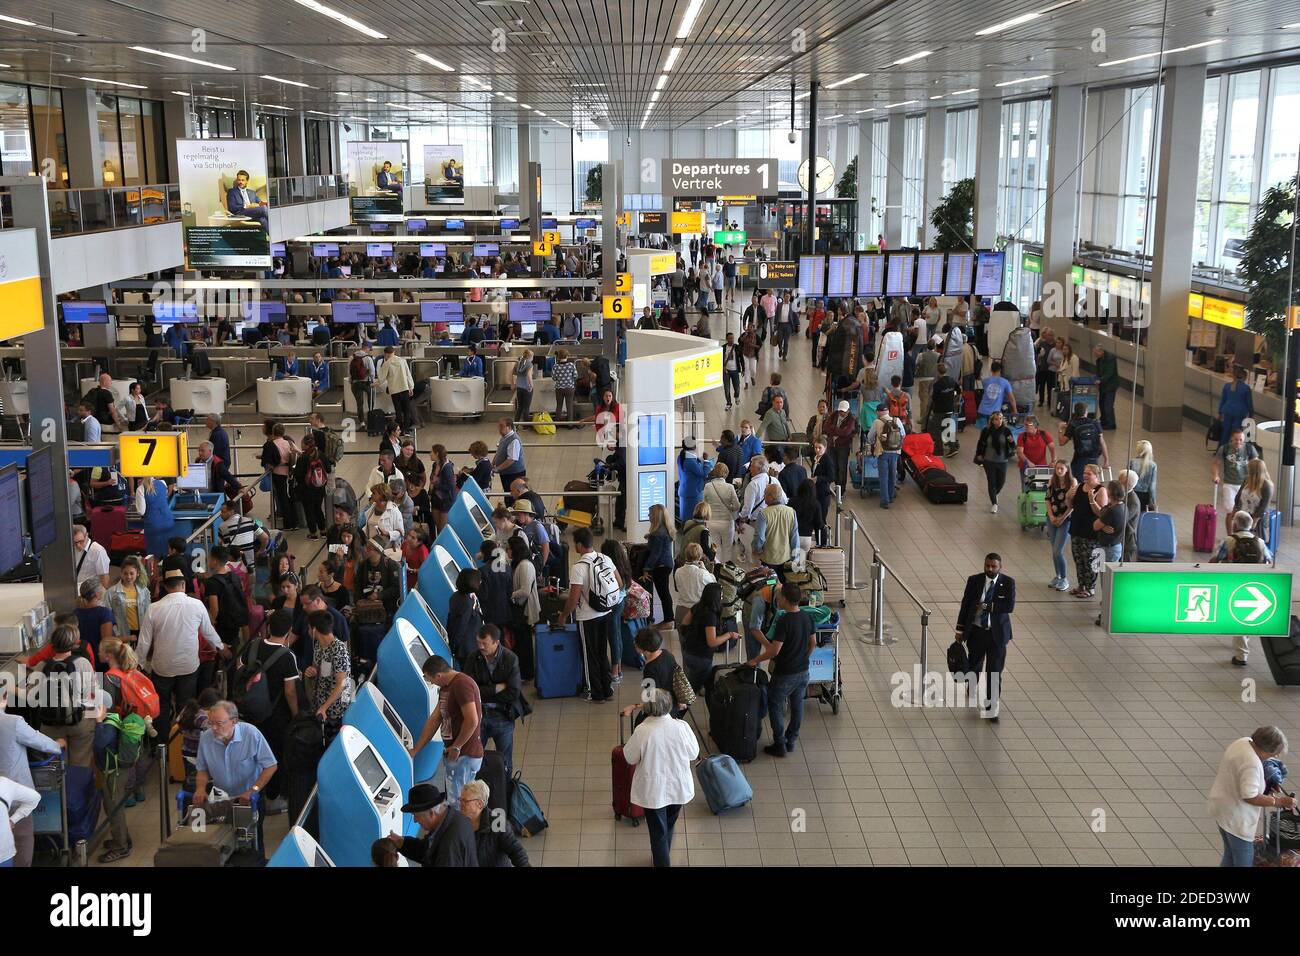 AMSTERDAM, NETHERLANDS - JULY 11, 2017: Travelers visit Schiphol Airport in Amsterdam. Schiphol is the 12th busiest airport in the world with more tha Stock Photo